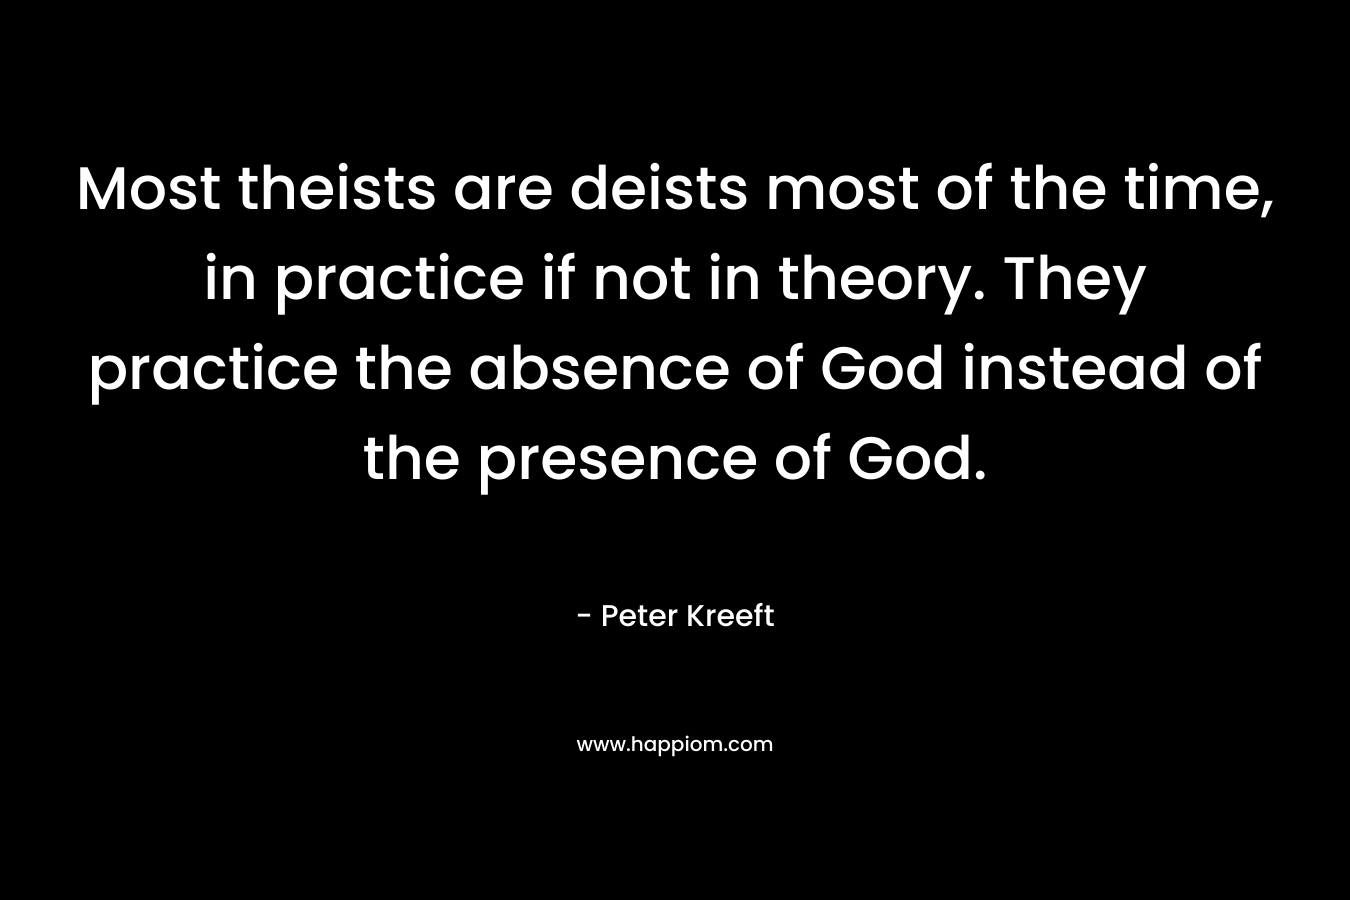 Most theists are deists most of the time, in practice if not in theory. They practice the absence of God instead of the presence of God.